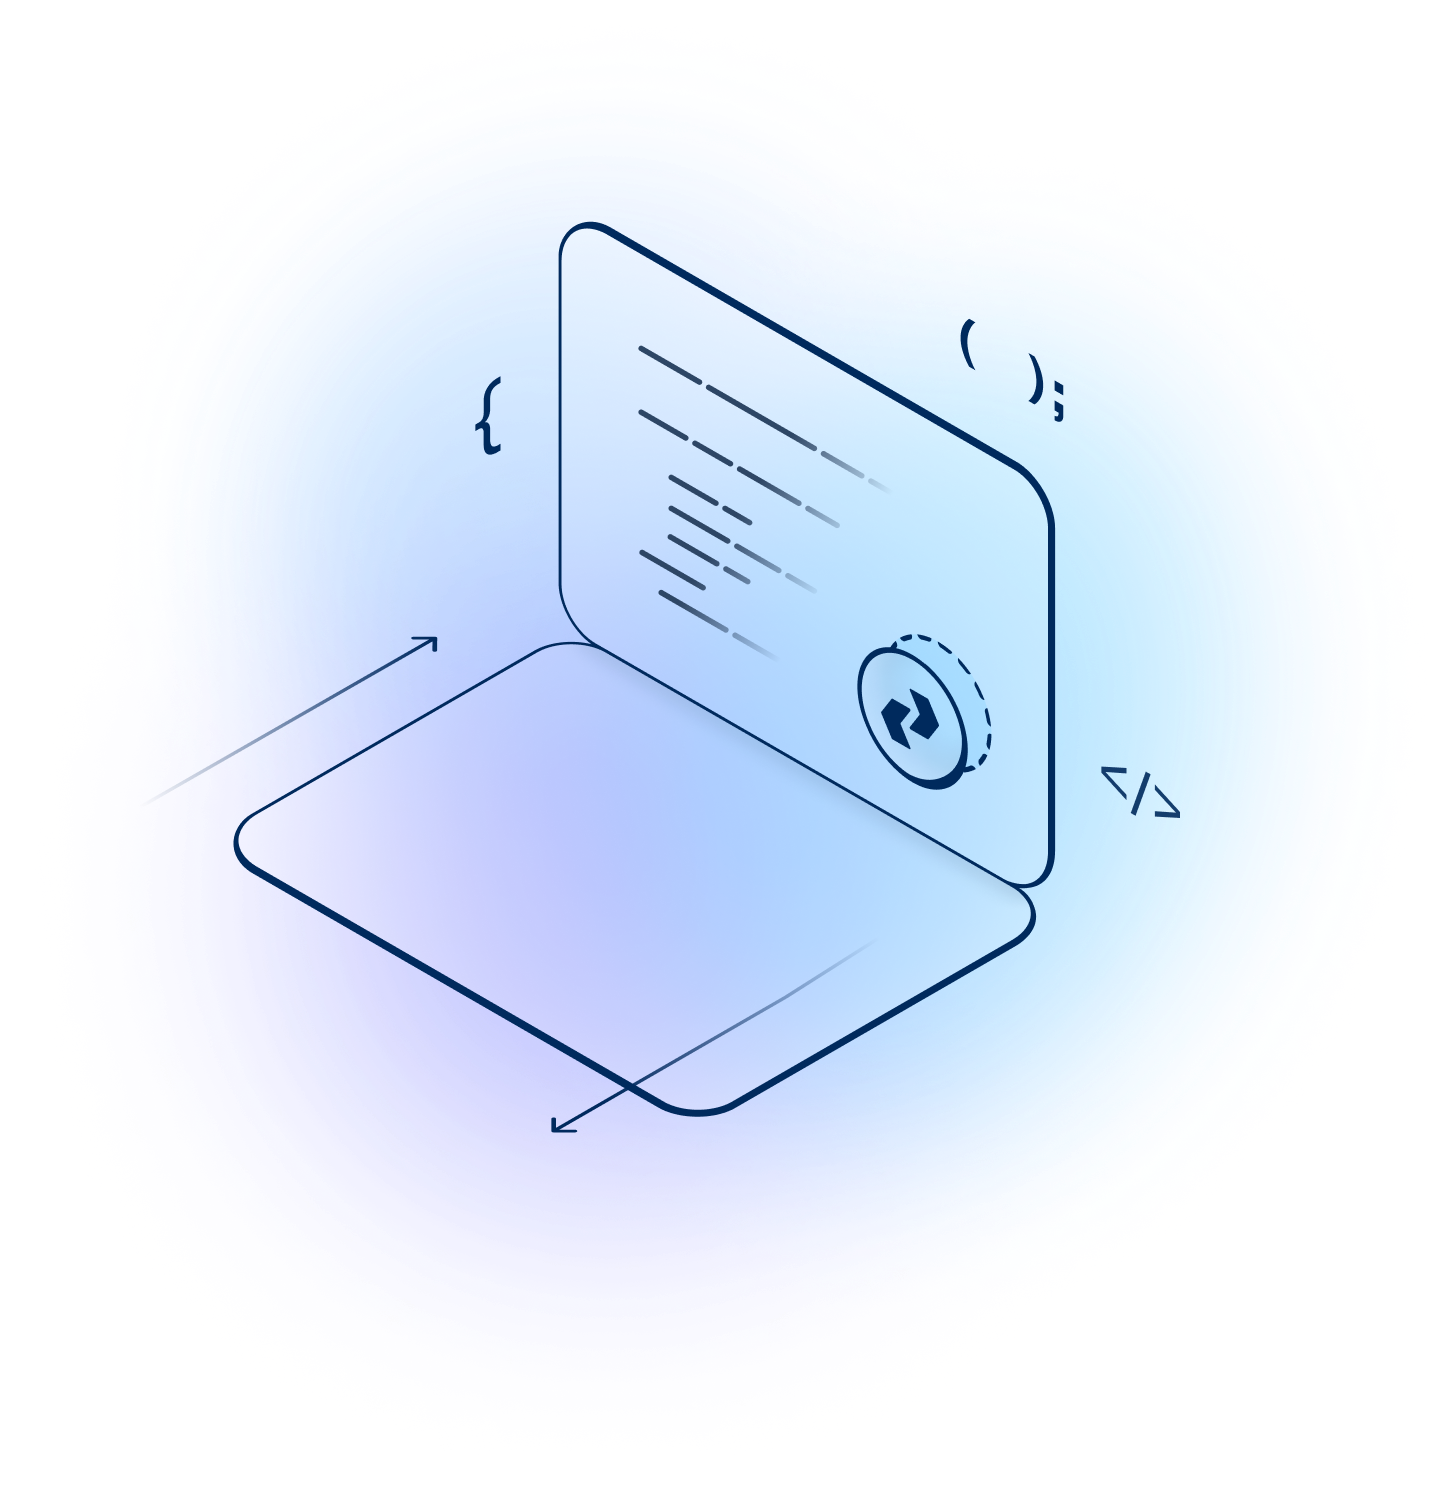 Abstract perks image of a laptop with gradient background and developer experts icon